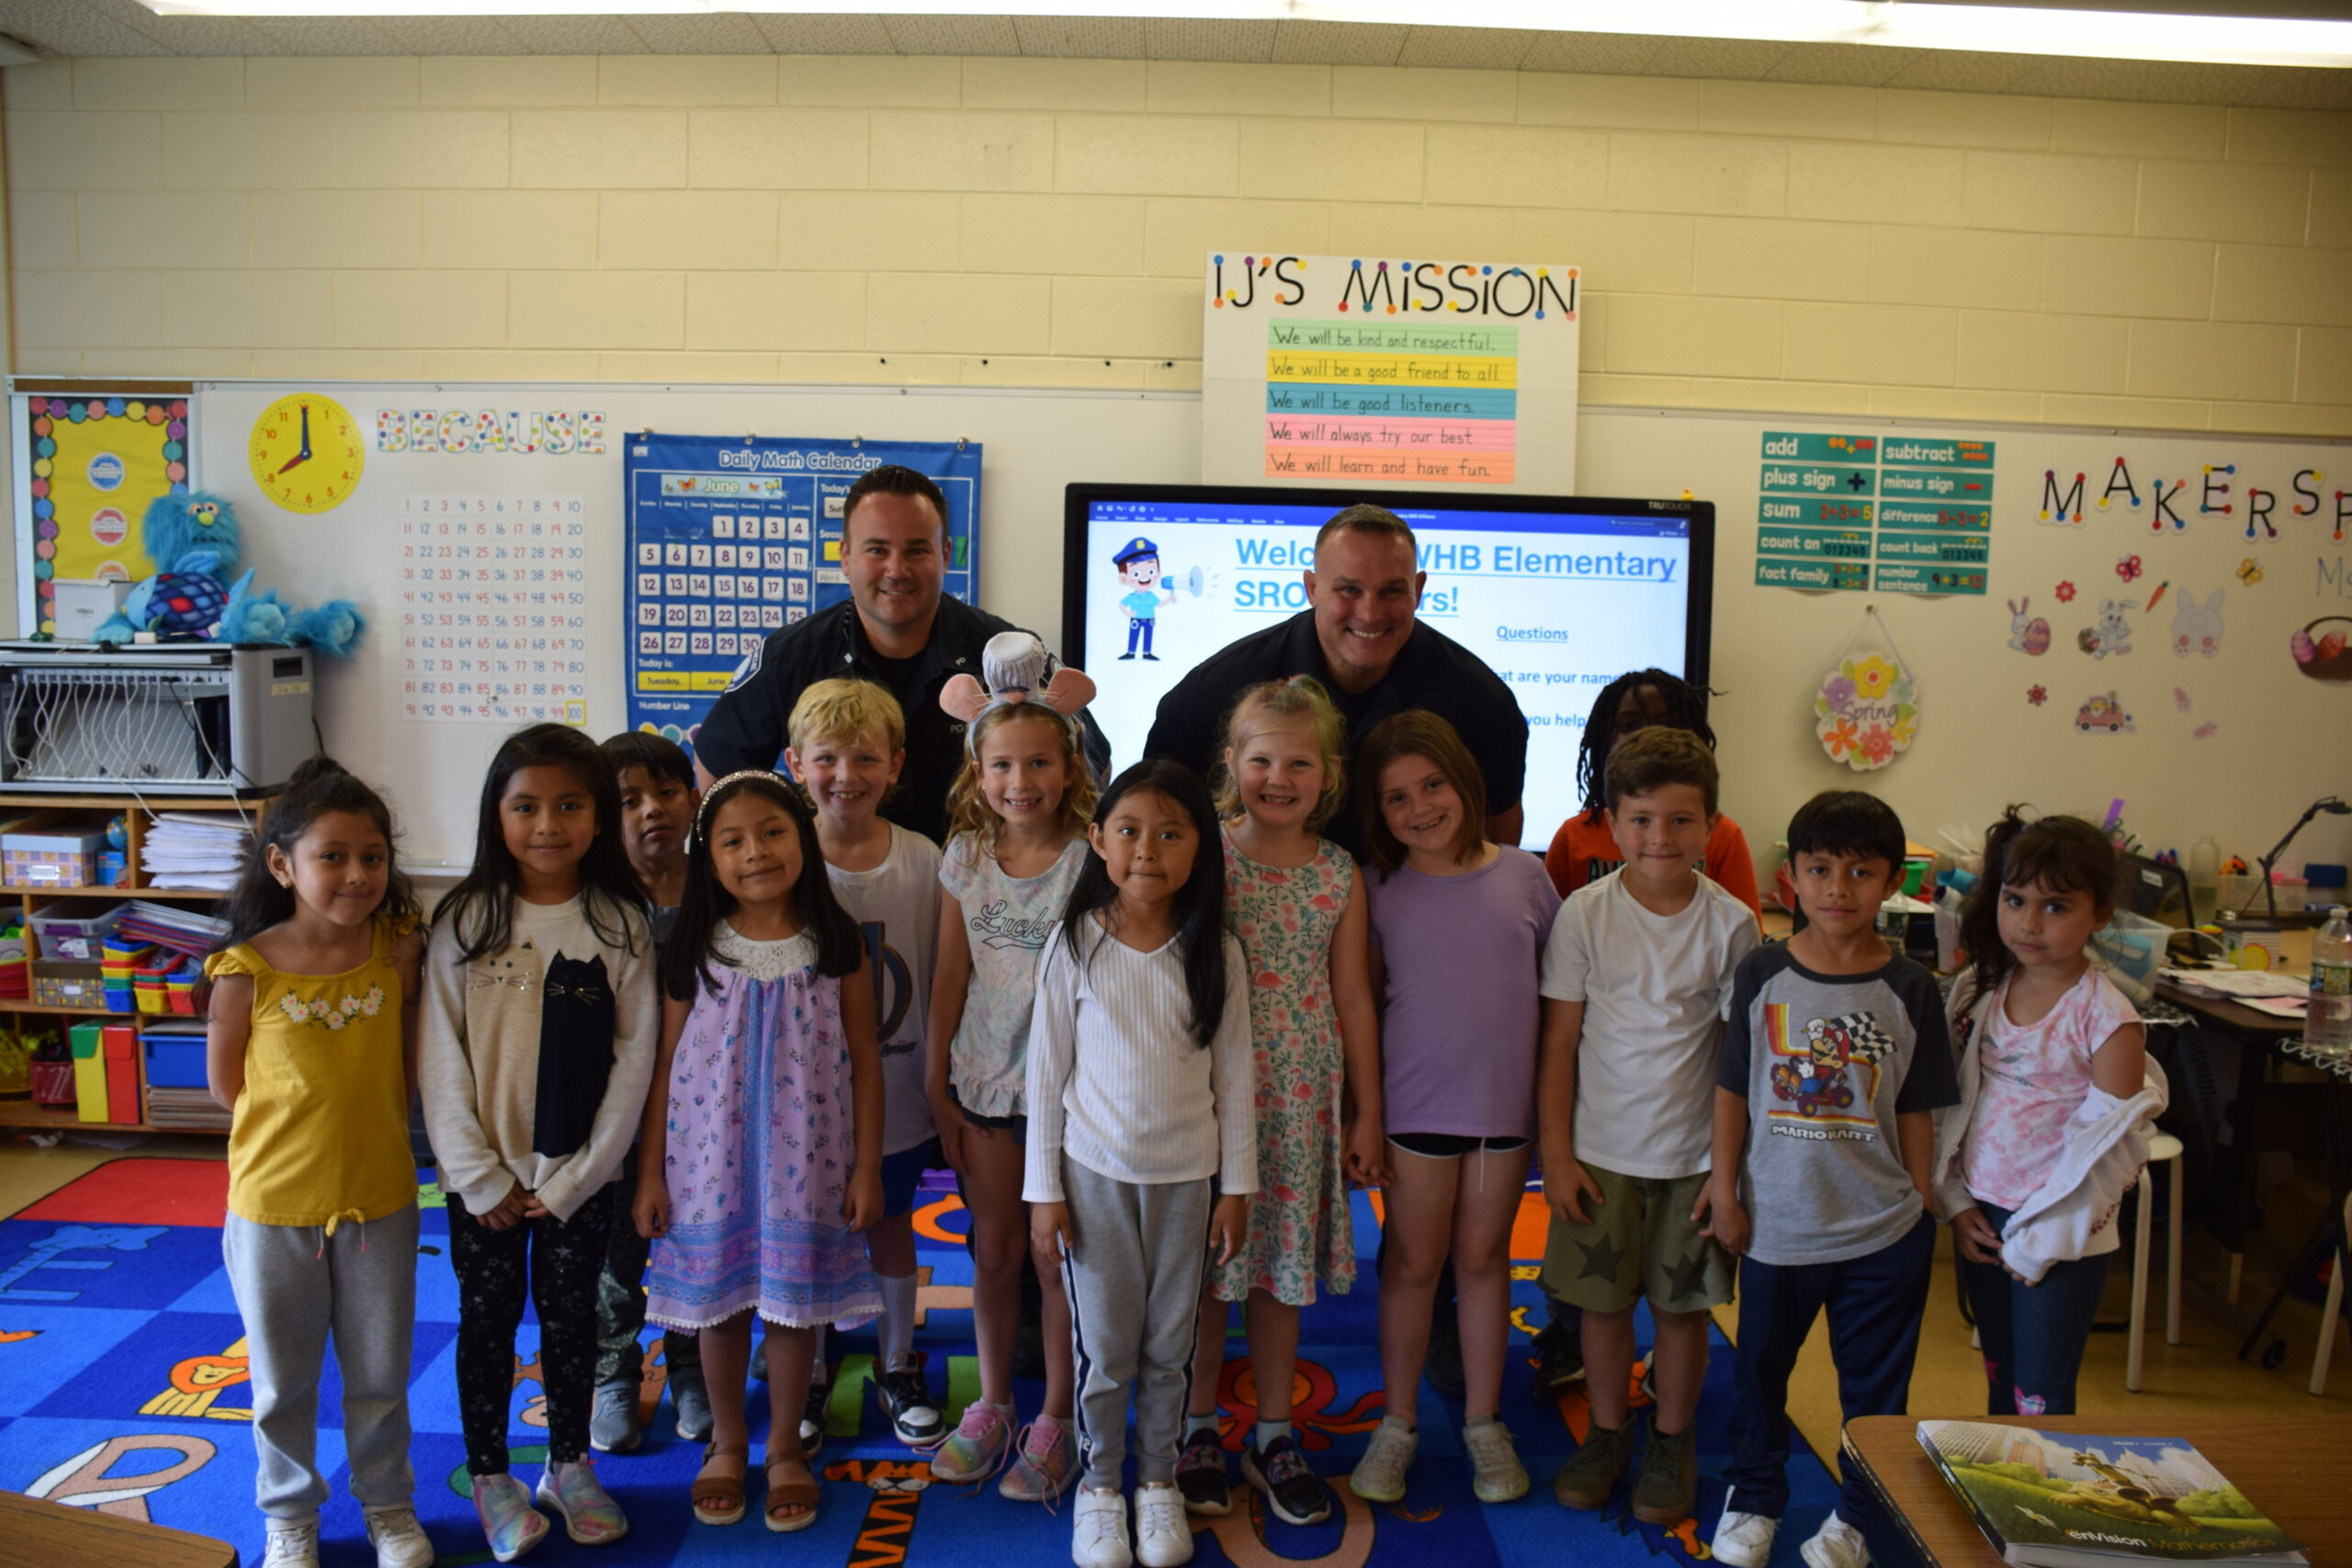 Westhampton Beach Elementary School students recently participated in a meet and greet with their school’s new school resource officers, Mark Yakabowski of the Westhampton Beach Village Police and Tony Vecchio of the Southampton Police Department. During the event, the officers visited each classroom, introduced themselves, and answered myriad questions from students about their jobs, favorite foods, favorite colors and more. COURTESY WESTHAMPTON BEACH SCHOOL DISTRICT